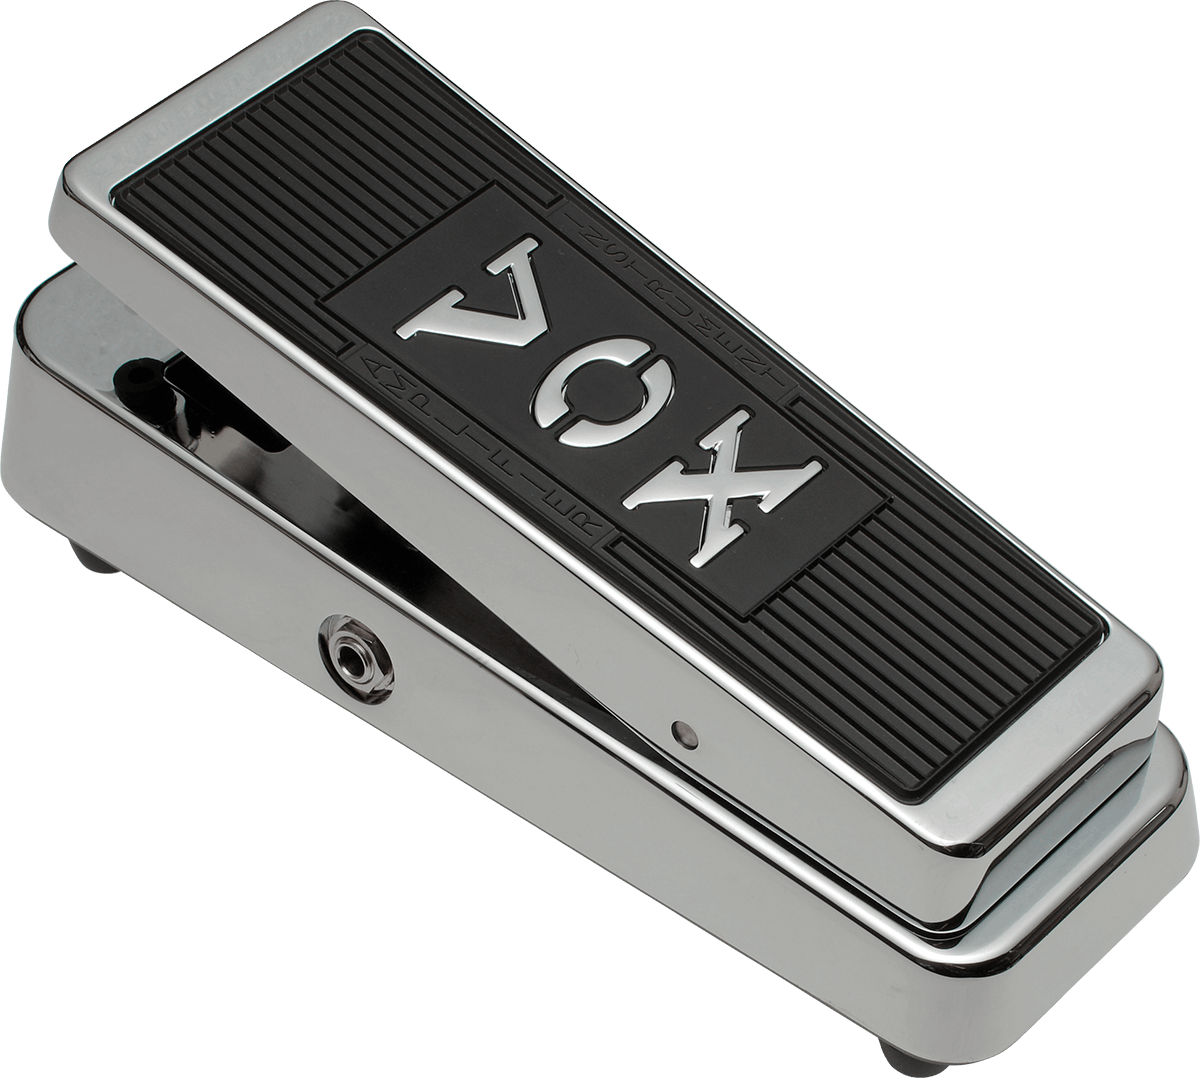 Vox Vrm-1-ltd Real Mccoy Chrome Edition Wah - Wah/filter effectpedaal - Main picture